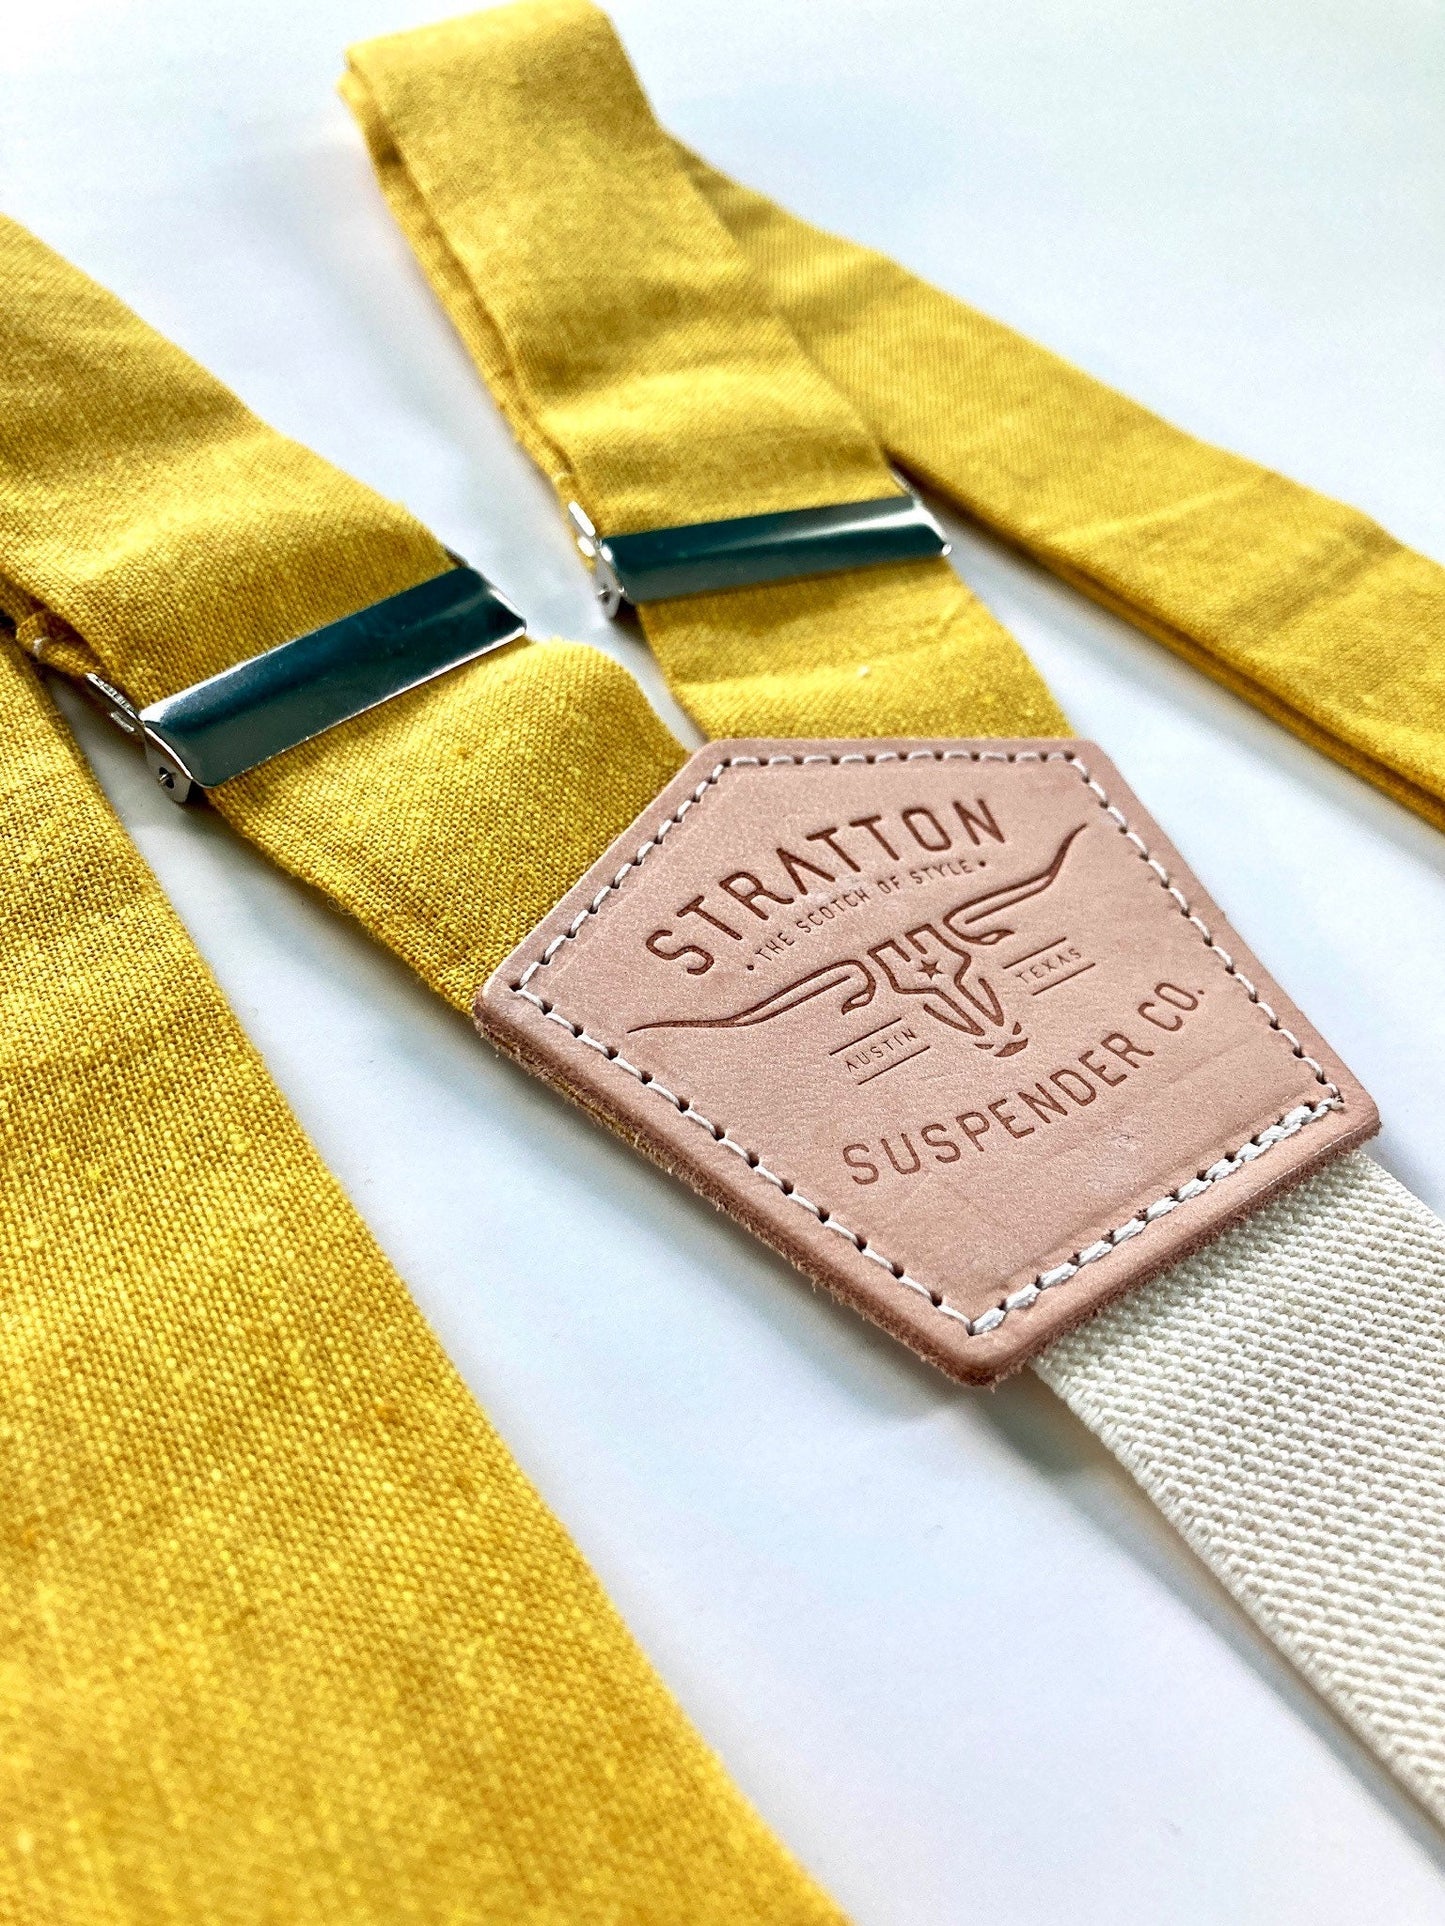 Canary Yellow Linen Button On Suspenders Set - Fall Collection Stratton Suspender Co.